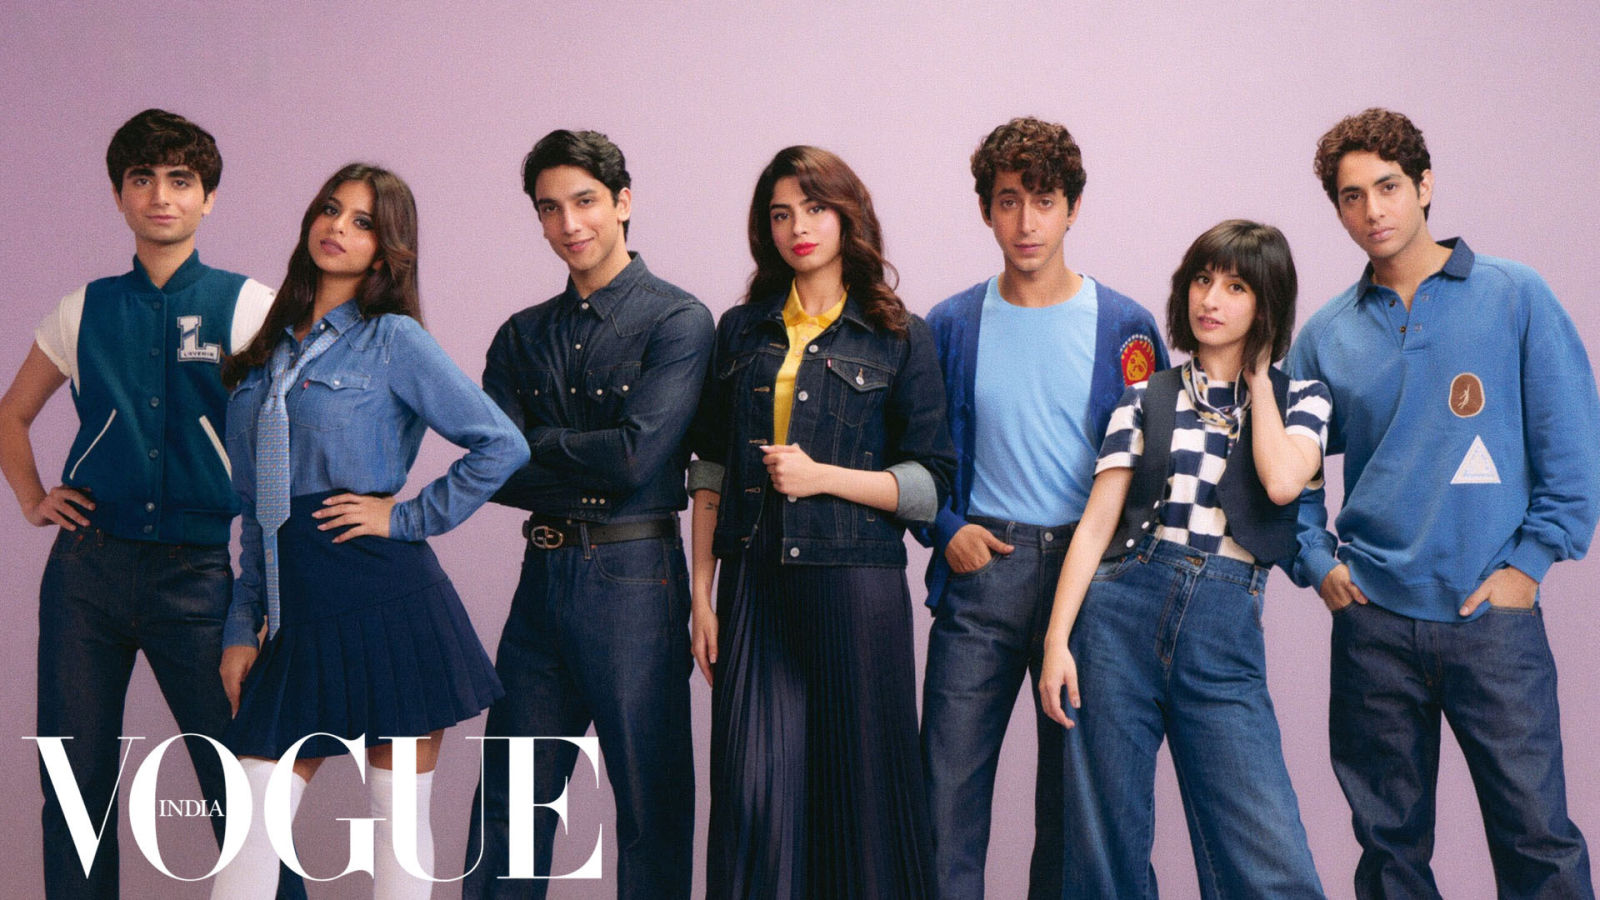 In conversation with the cast of The Archies | Vogue India